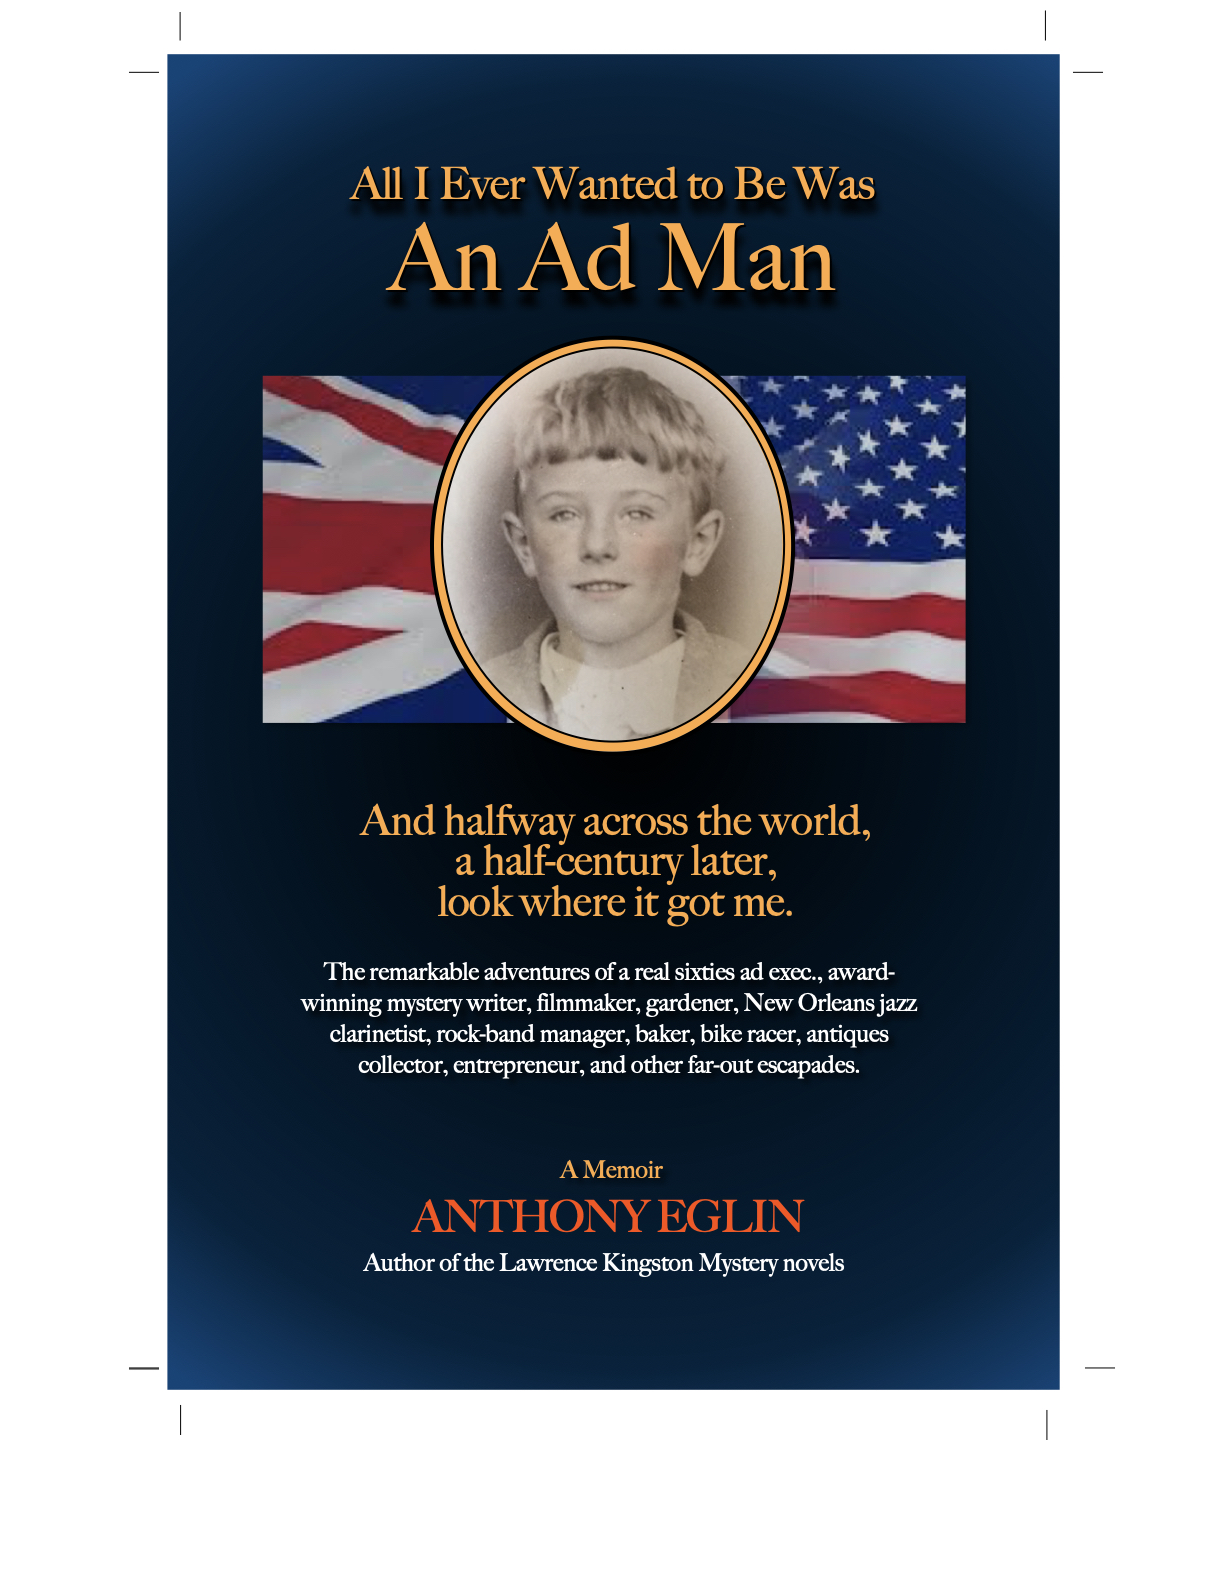 All I Ever Wanted To Be Was an Ad Man by Anthony Eglin